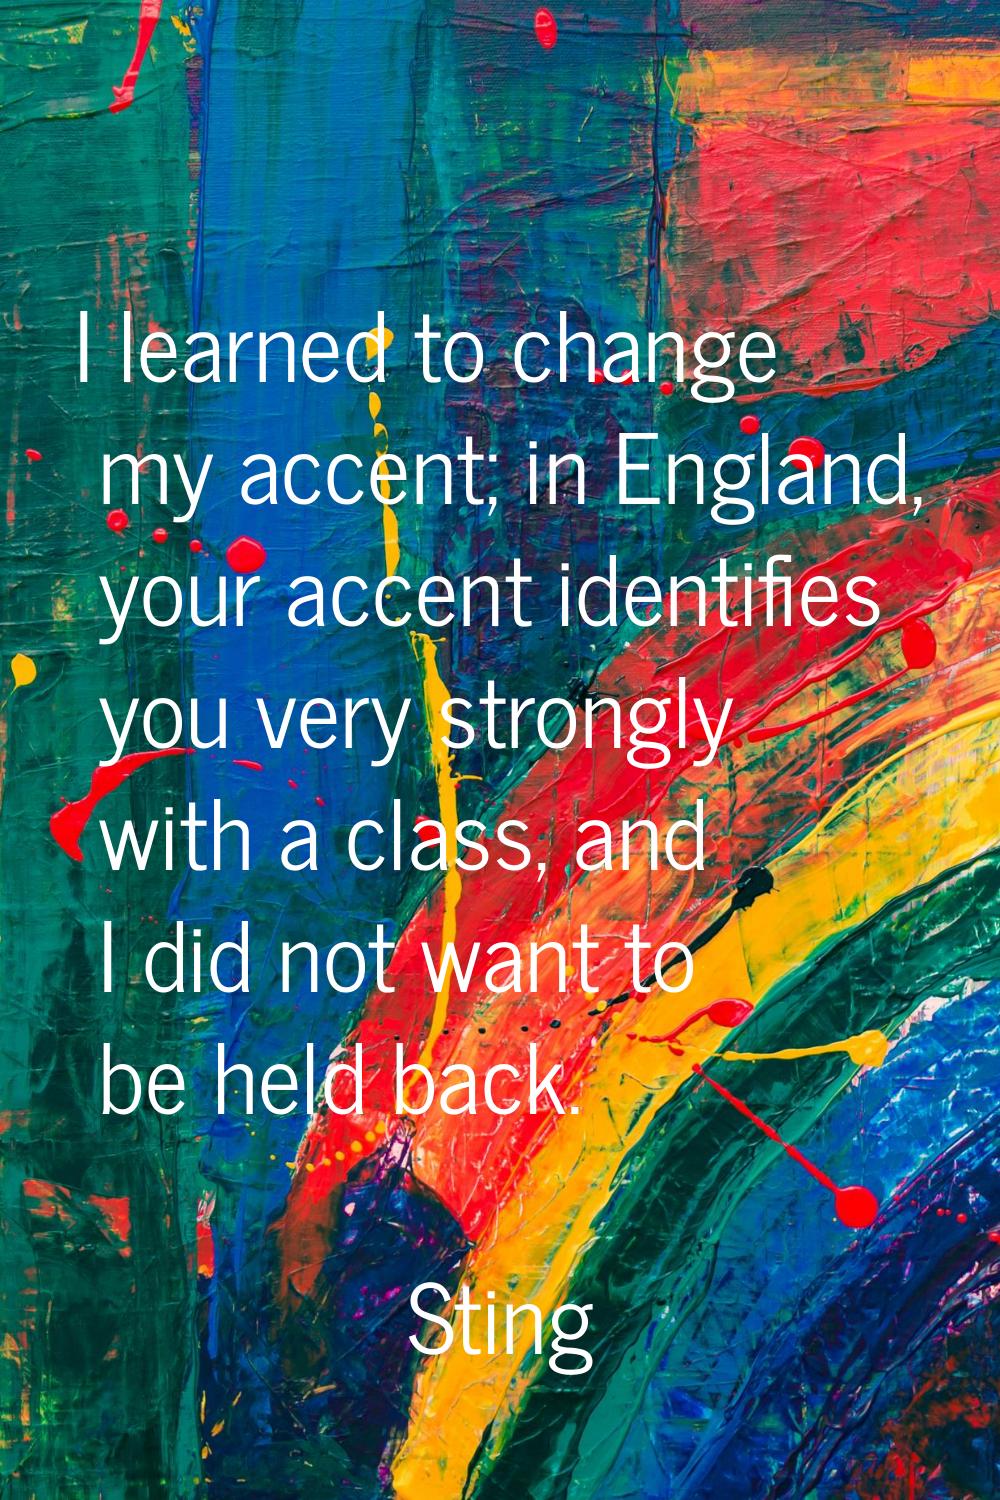 I learned to change my accent; in England, your accent identifies you very strongly with a class, a